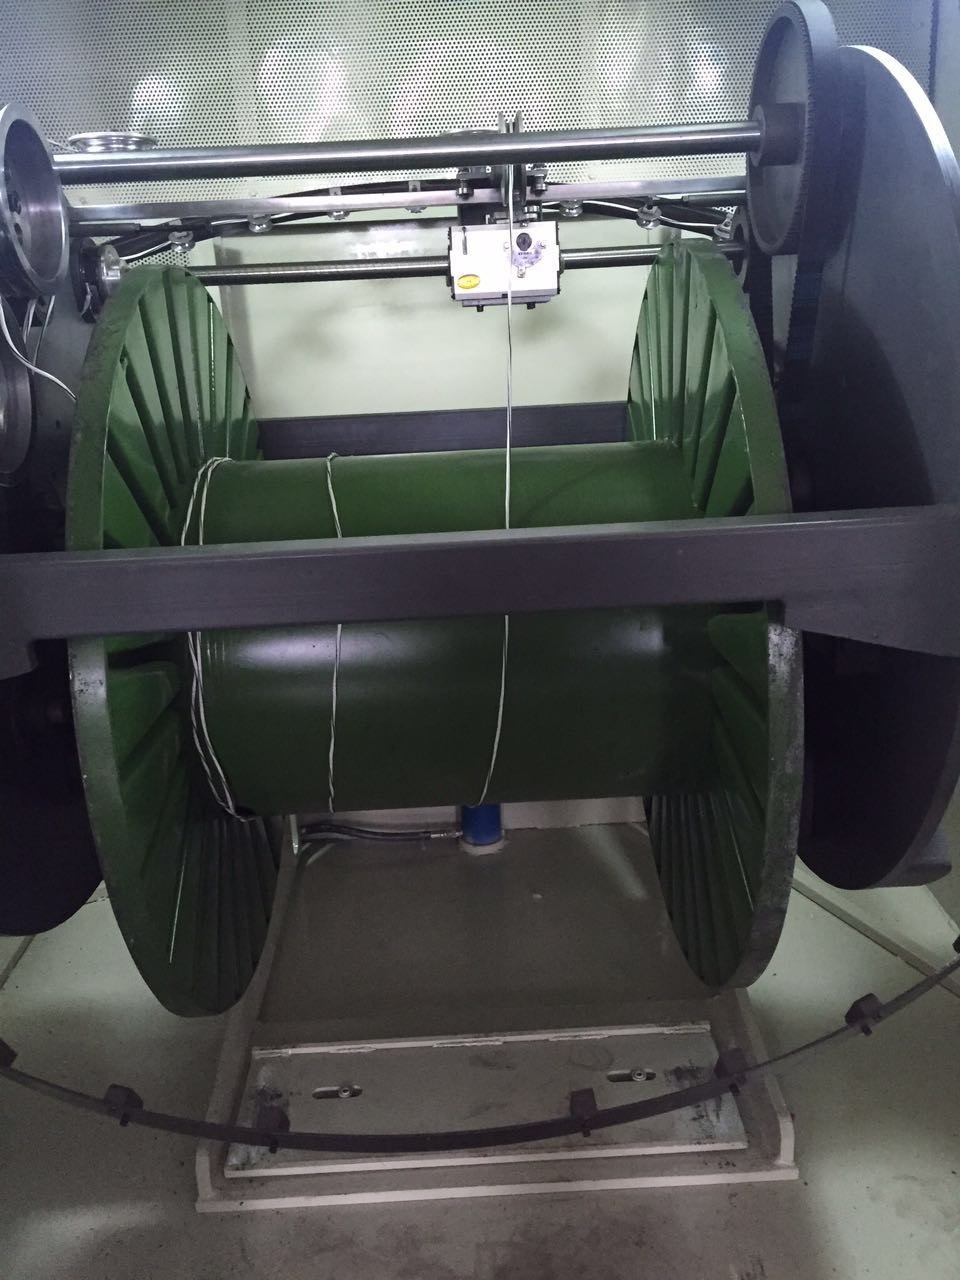 High Speed Bow Type Double Twisting Cable Machine